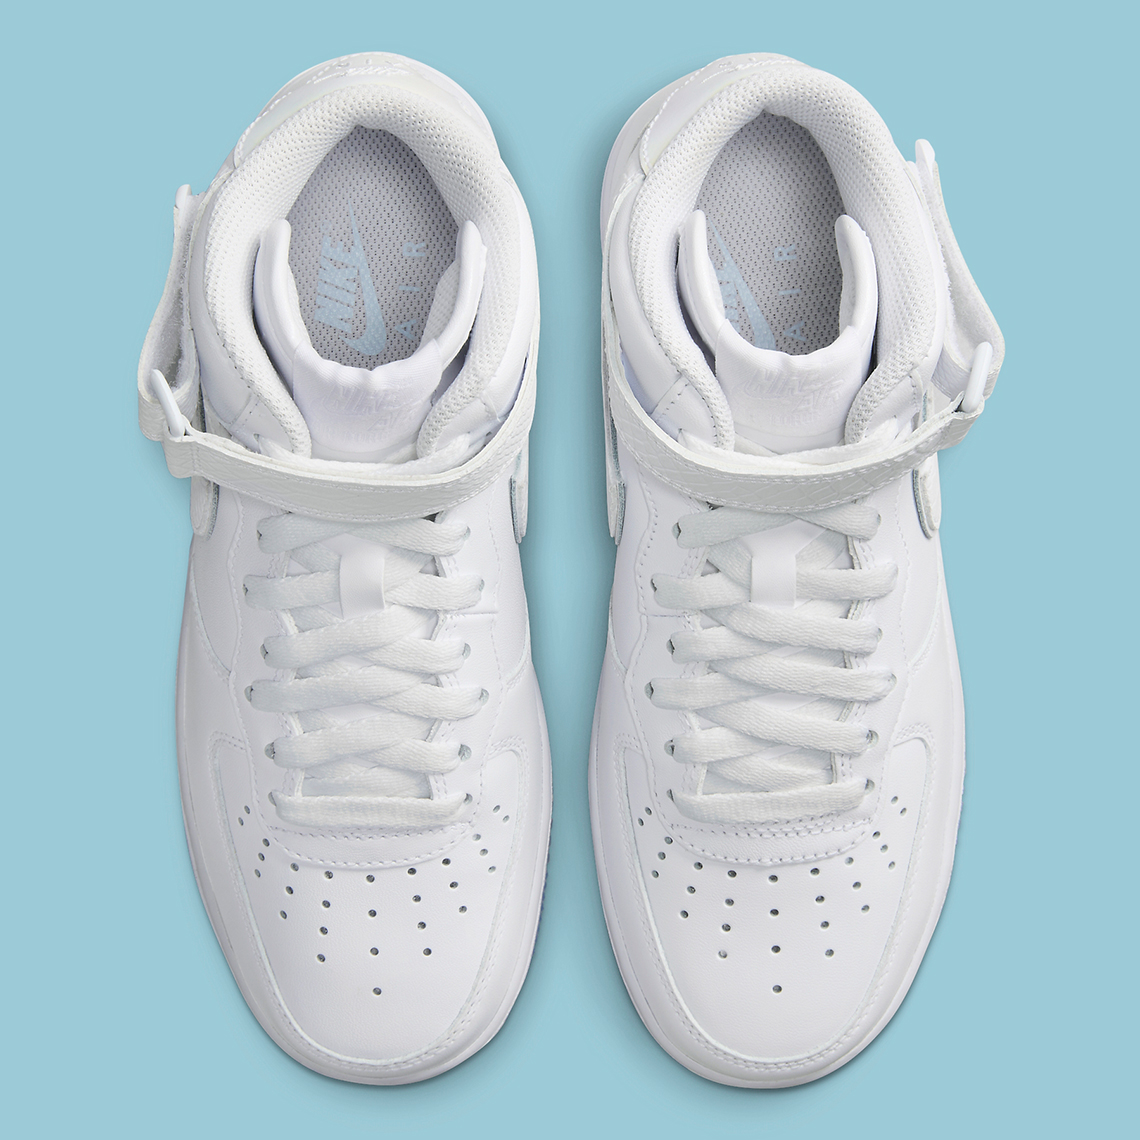 Reminder that he doesnt have access to Nike tech White Crocskin Icy Soles Fn4274 100 9